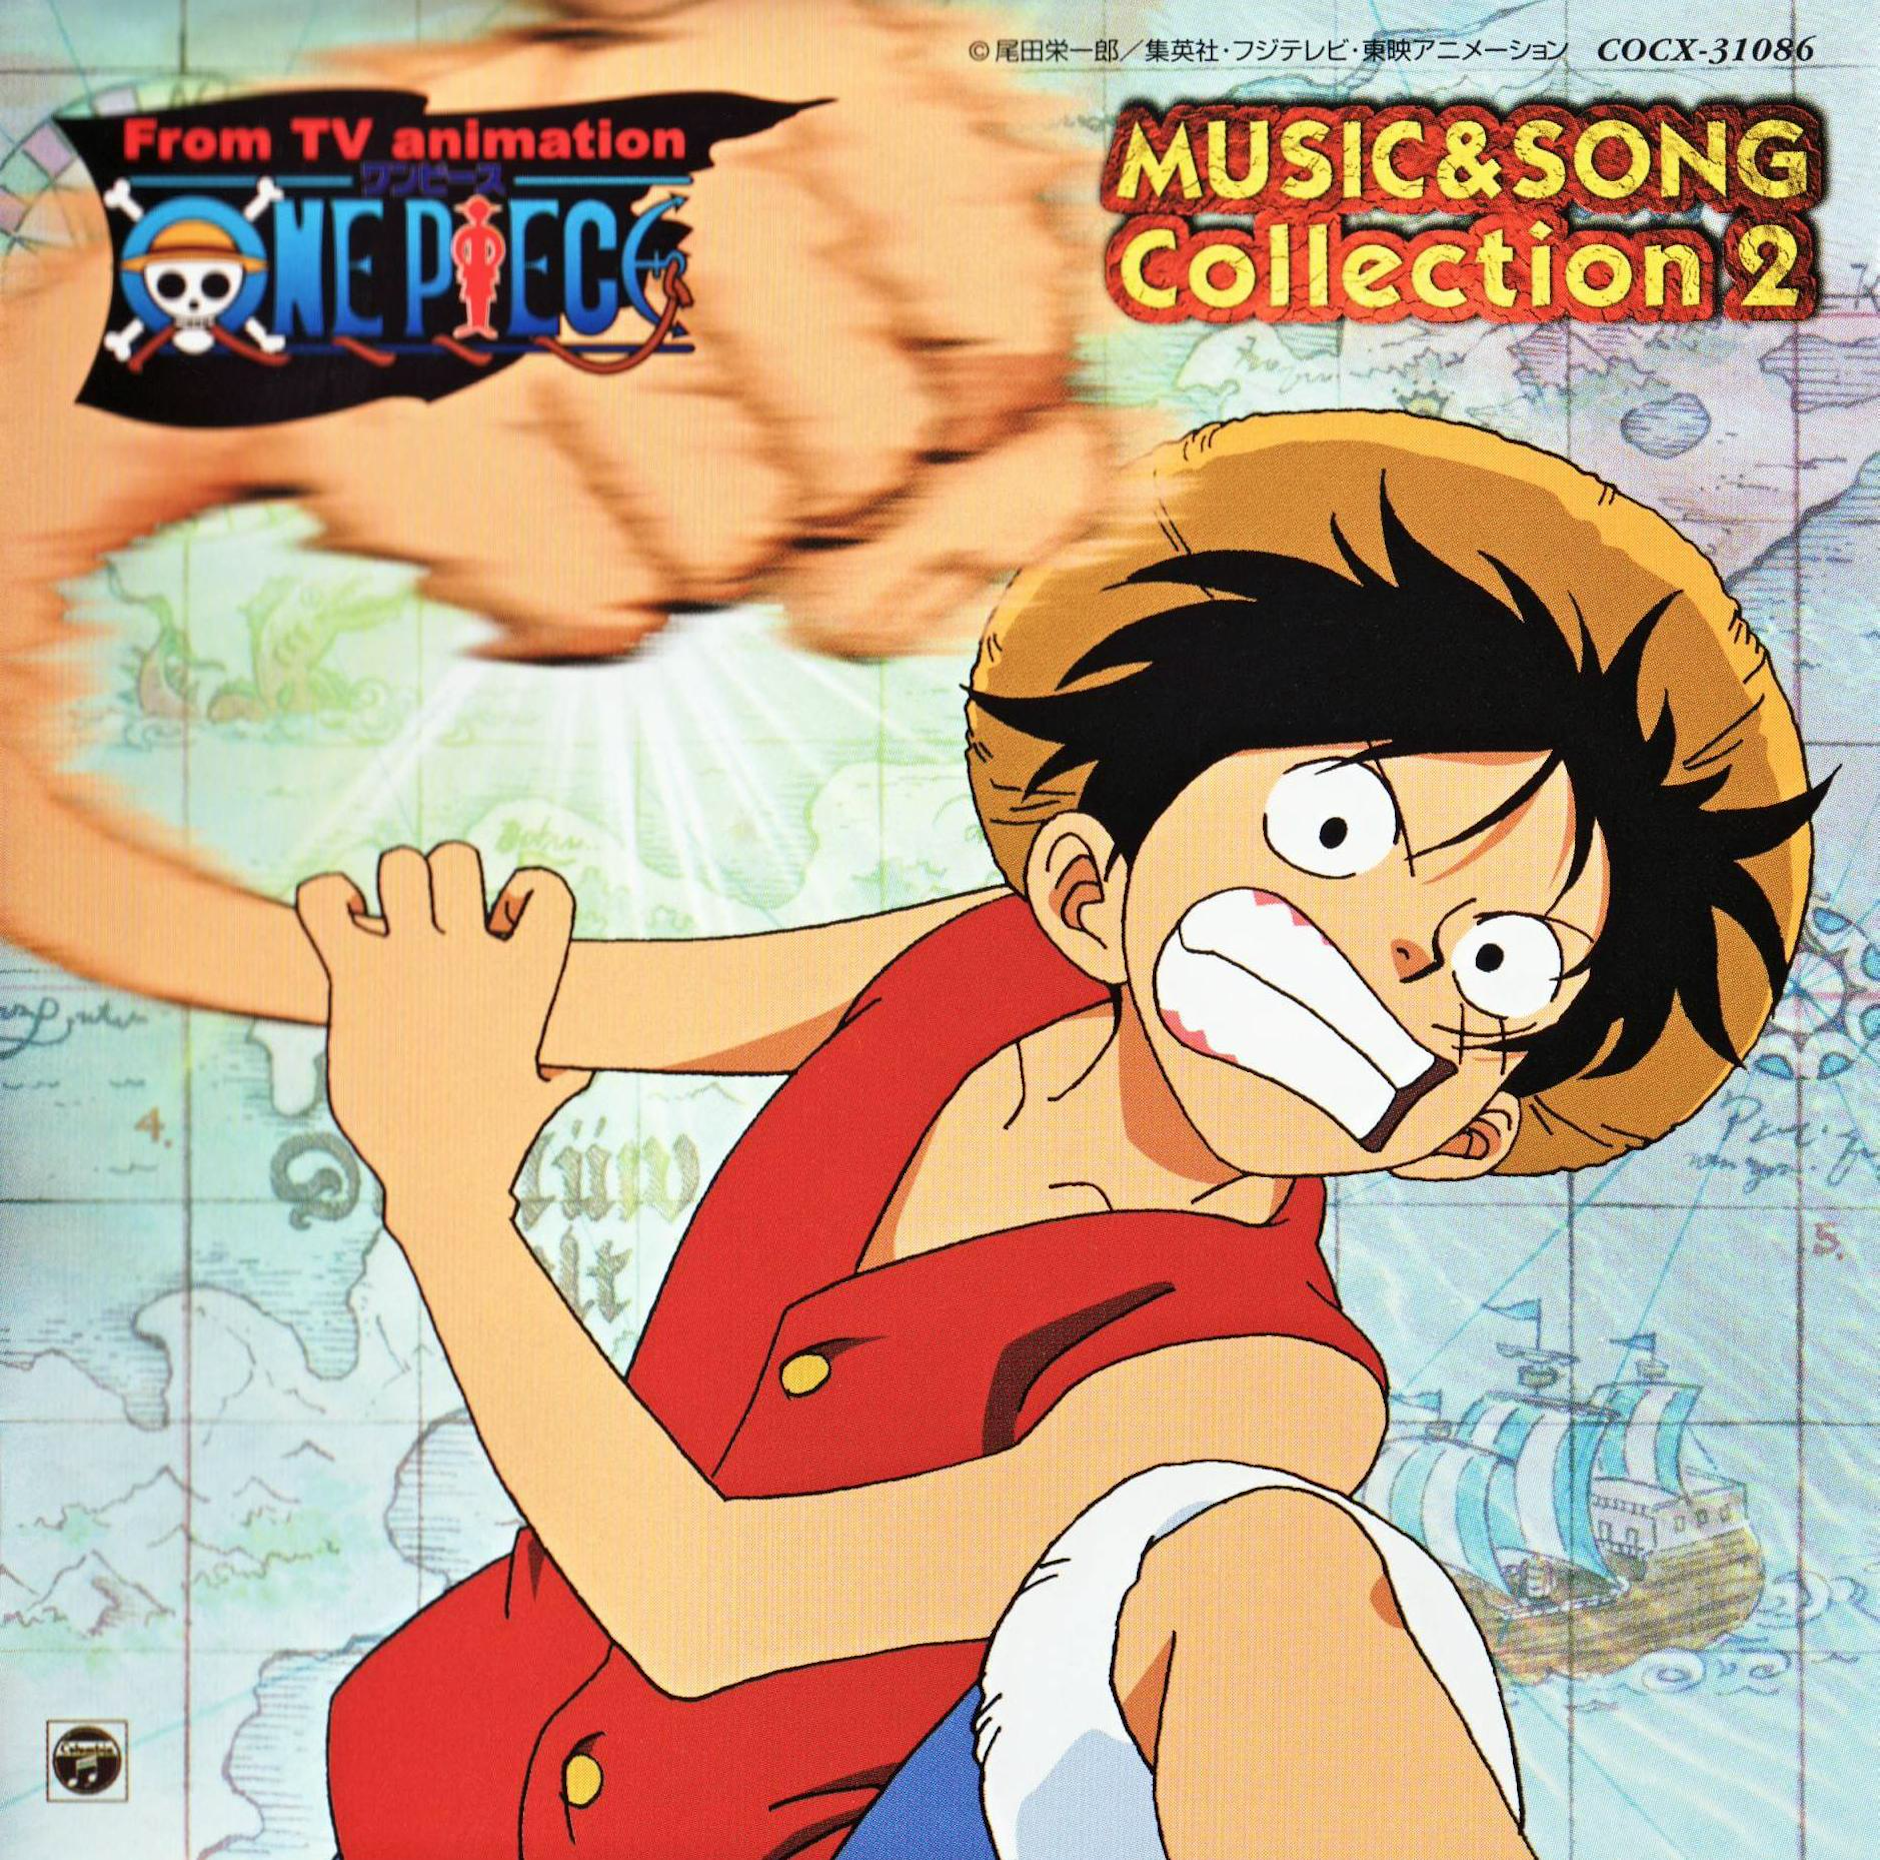 [CD] ONE PIECE STAMPEDE Original Sound Track NEW from Japan